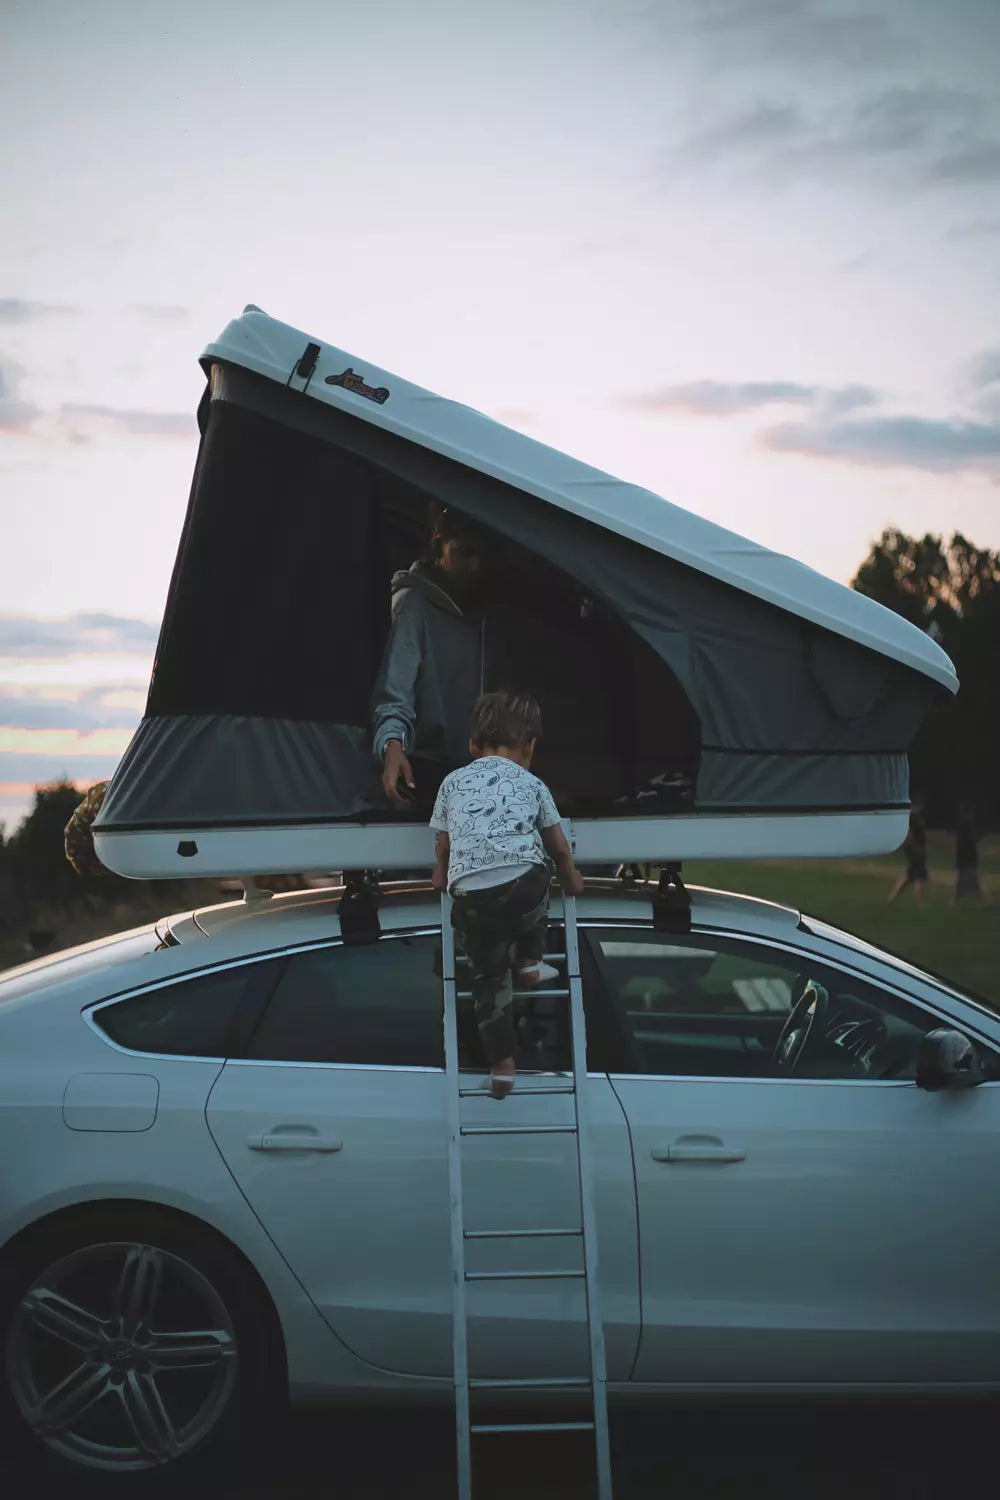 James Baroud Space S: Roof tent for couples and small families